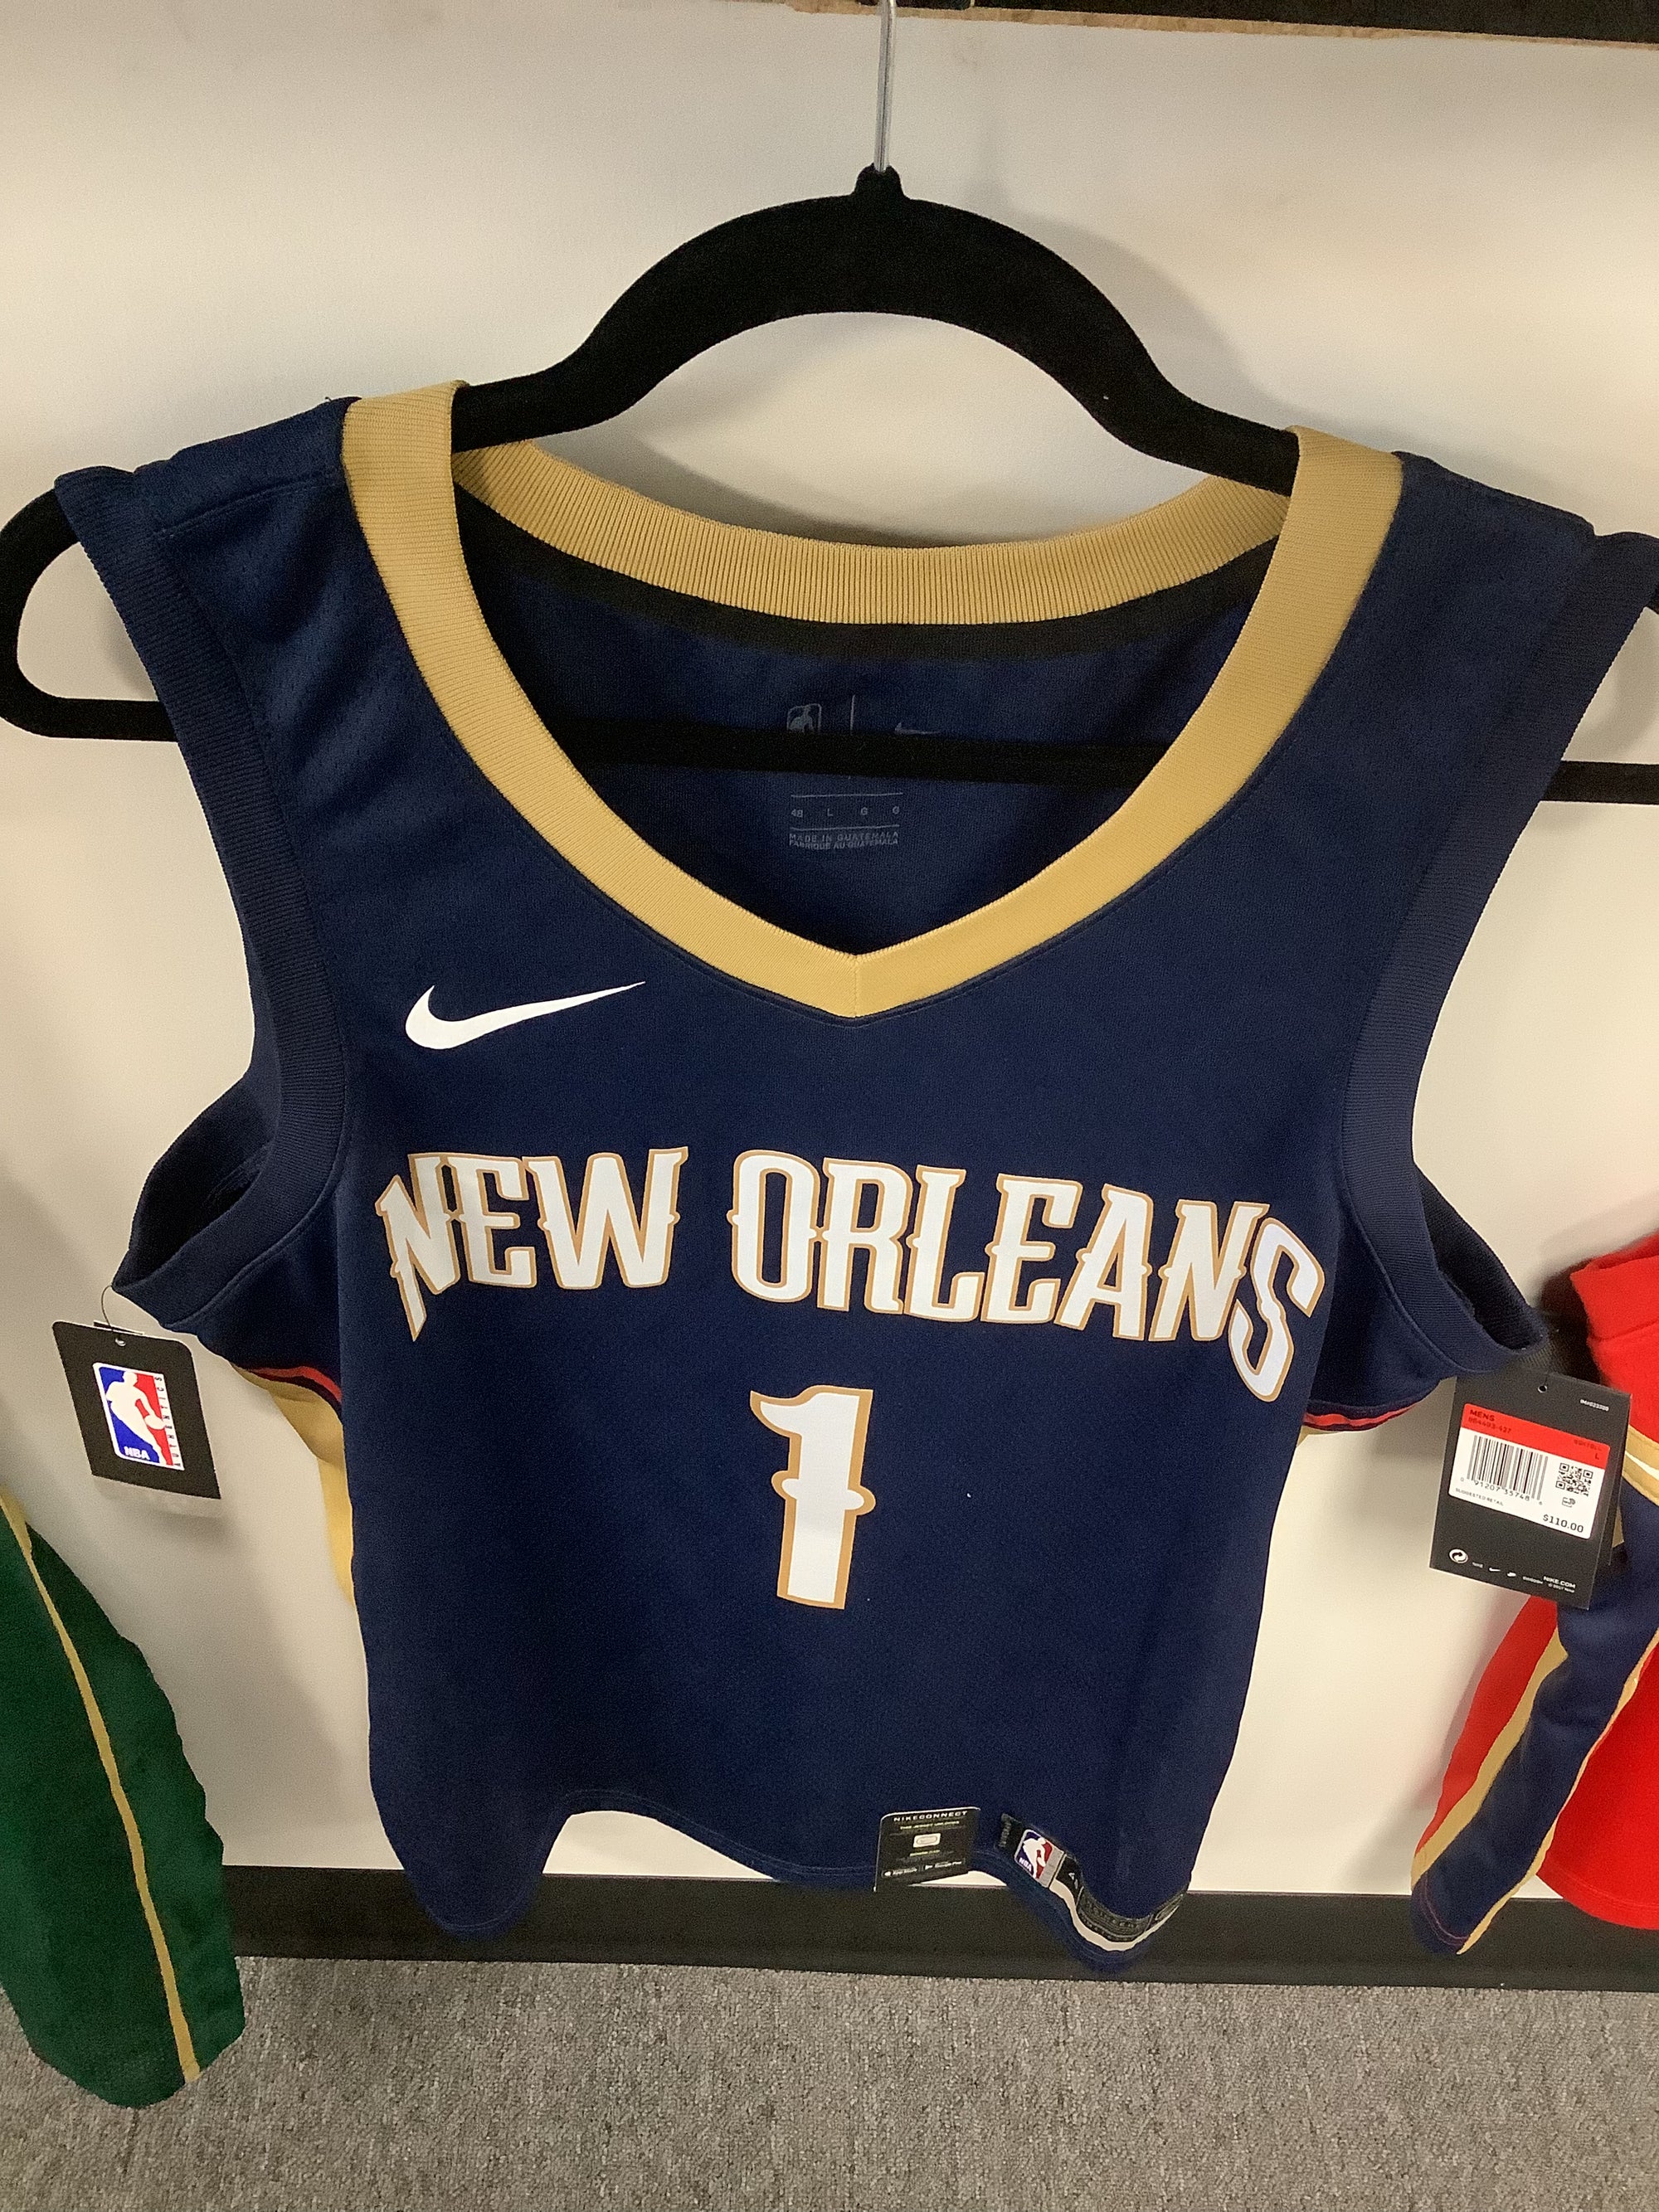 Zion Williamson New Orleans Pelicans Nike Fanatics Autographed Basketball Jersey